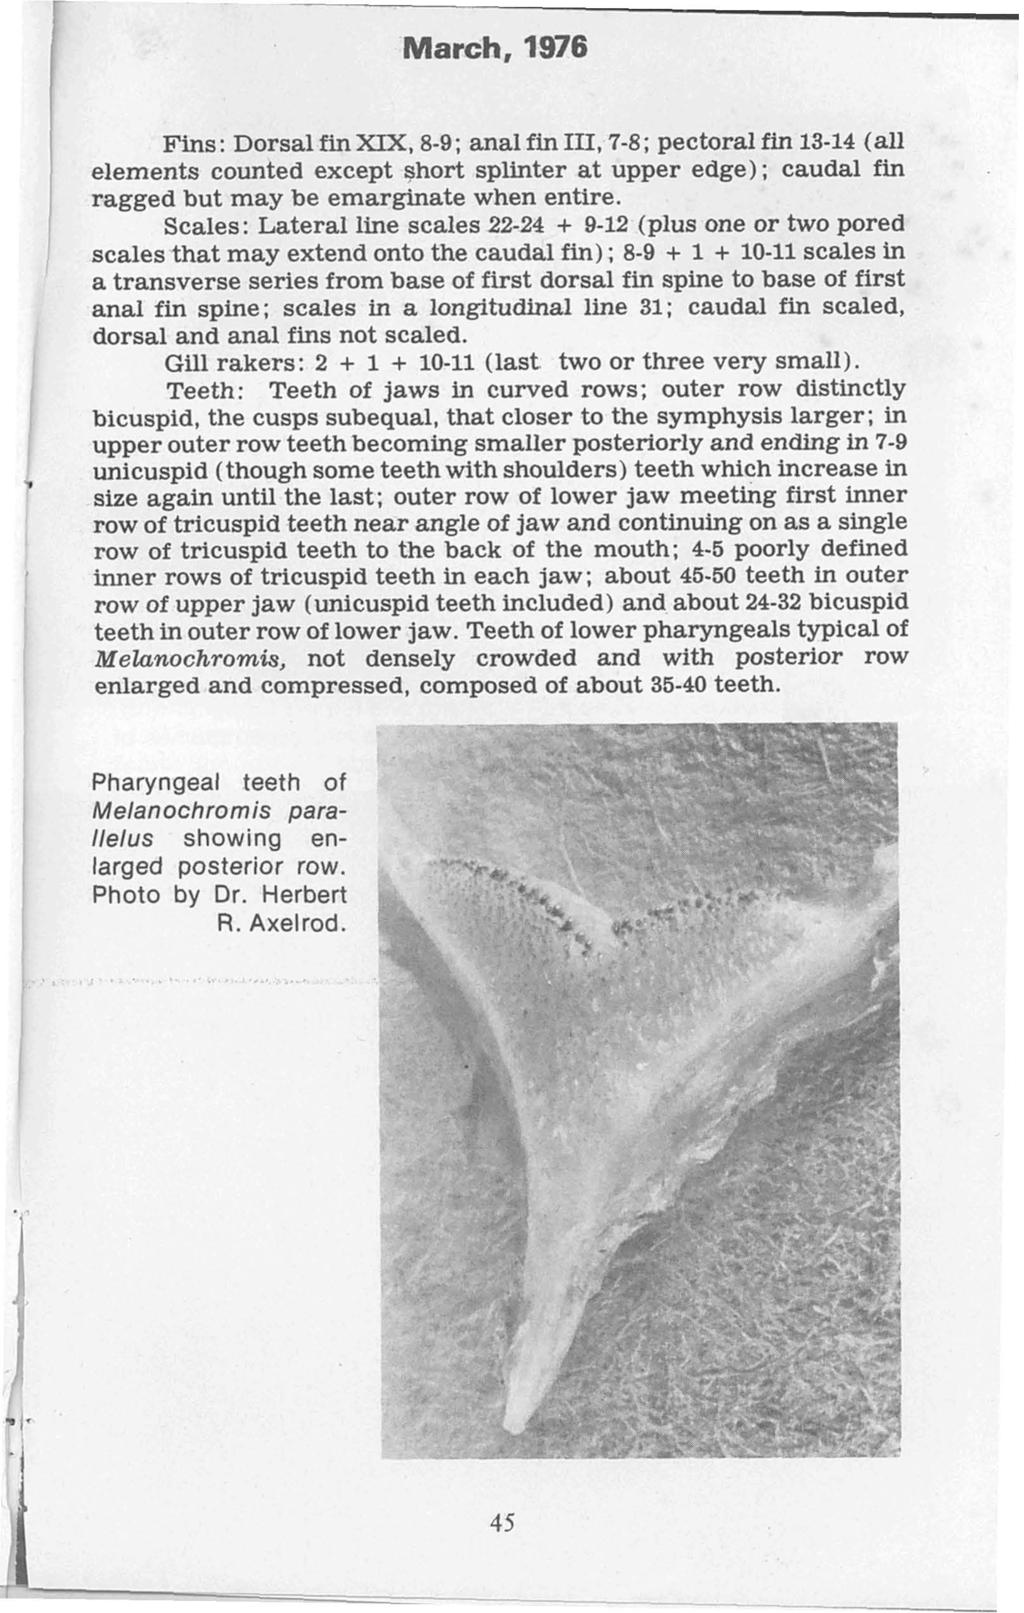 March, 1976 v Fins: Dorsal fin XIX, 8-9; anal fin III,7-8; pectoral fin 13-14 (all elements counted except short splinter at upper edge); caudal fin ragged but may be emarginate when entire.